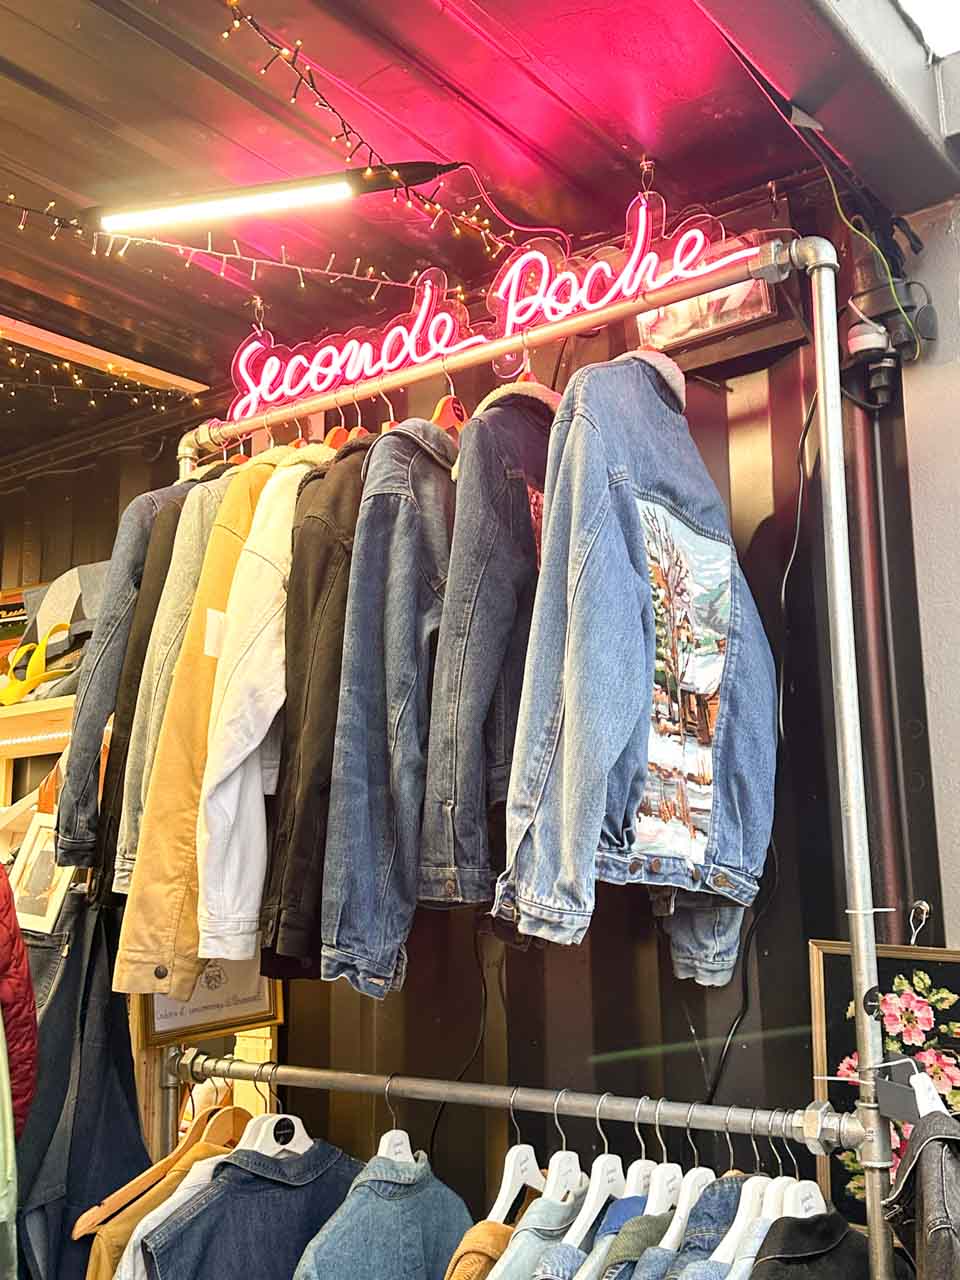 A neon sign reading "Seconde Poche" above a selection of second-hand clothing at a stall at Place Grimmeissen in Strasbourg